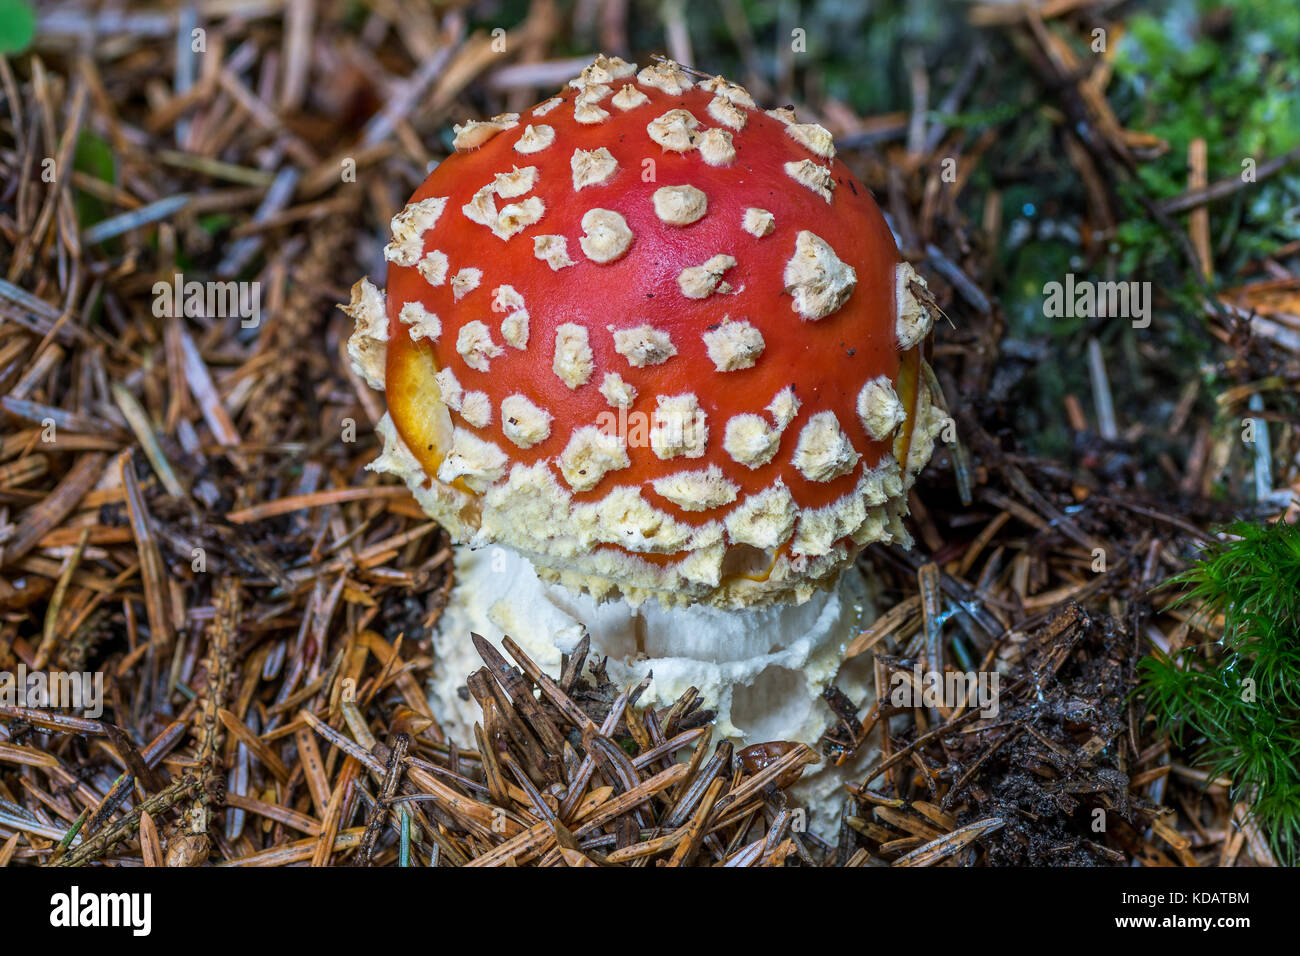 Amanita Muscari or commonly known as Fly Agaric. Stock Photo